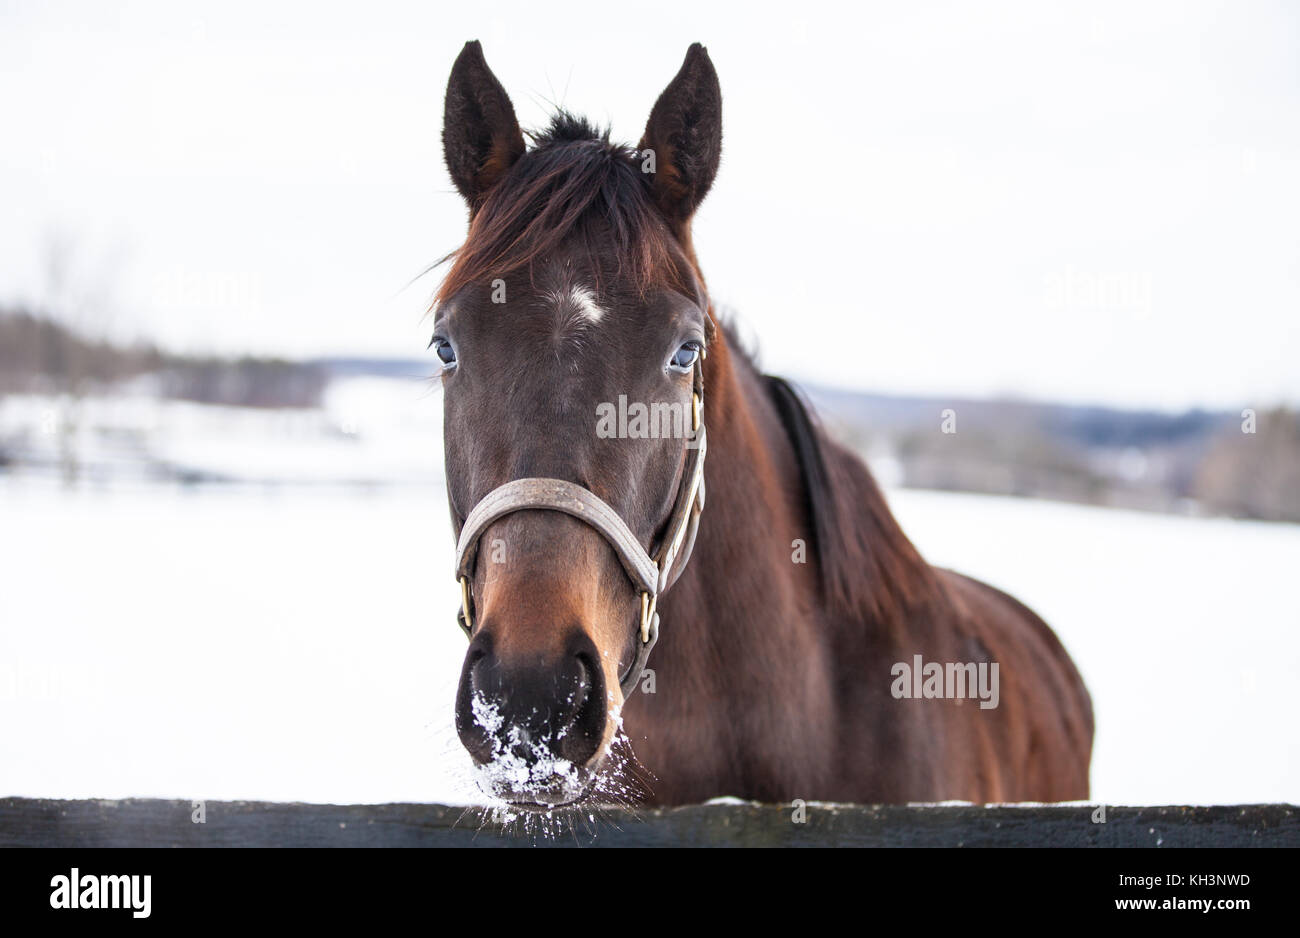 this horse was very curious and came over right away to check me out... Stock Photo